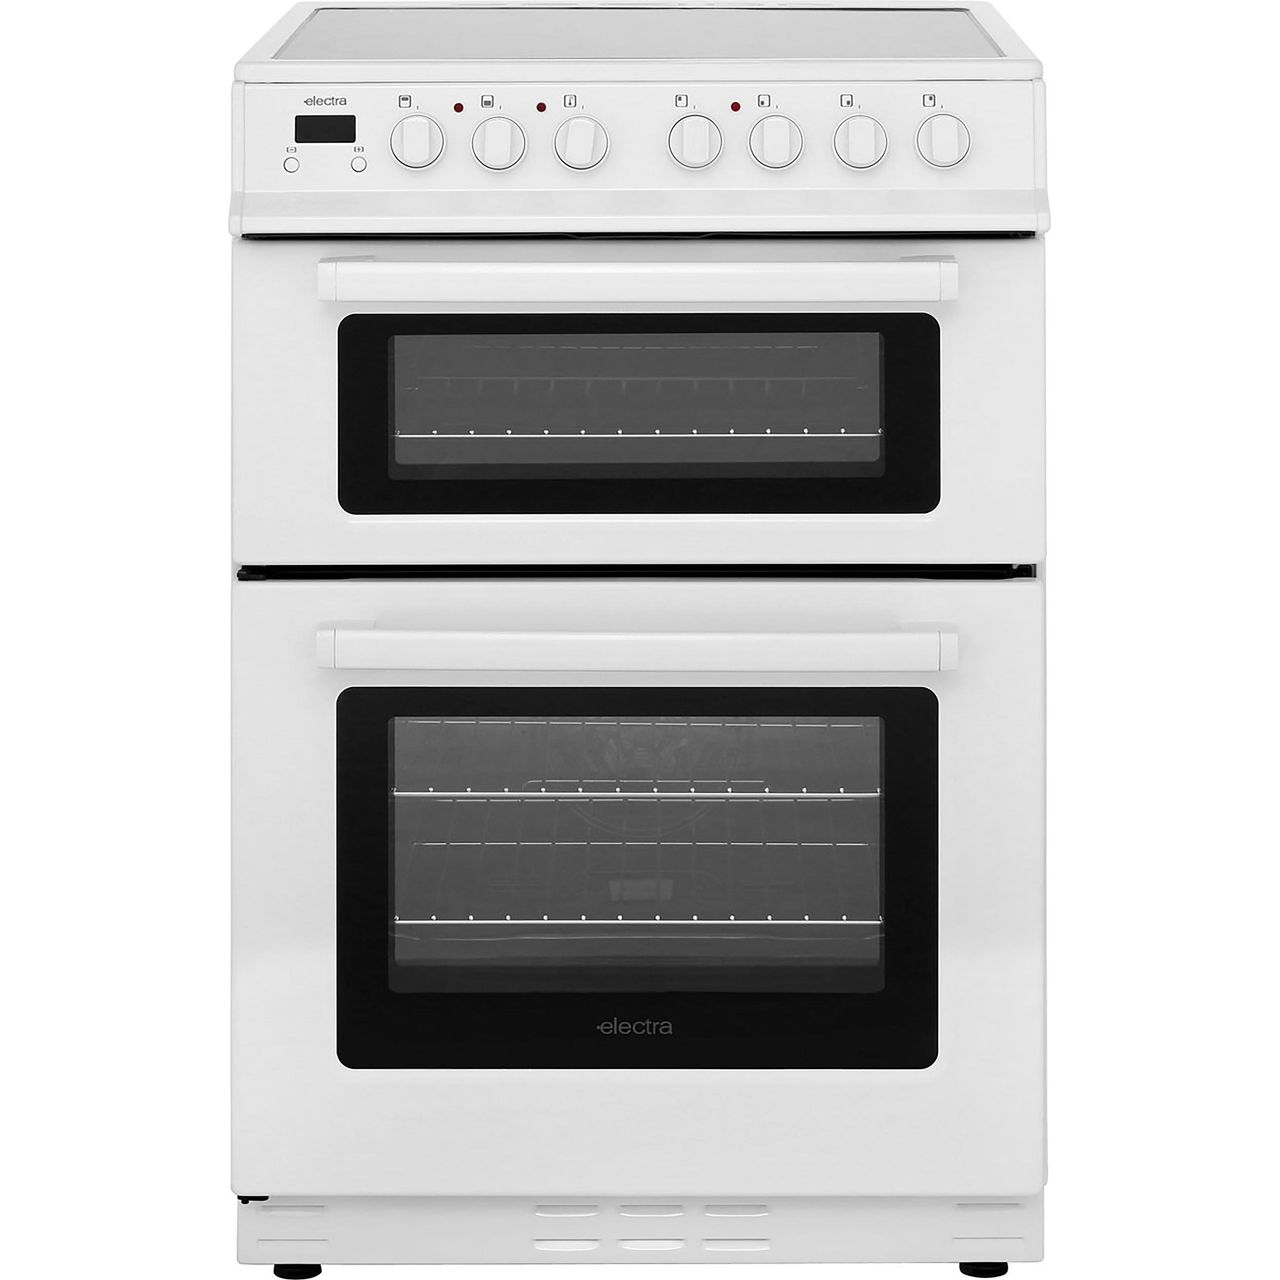 cheapest electric cooker with ceramic hob